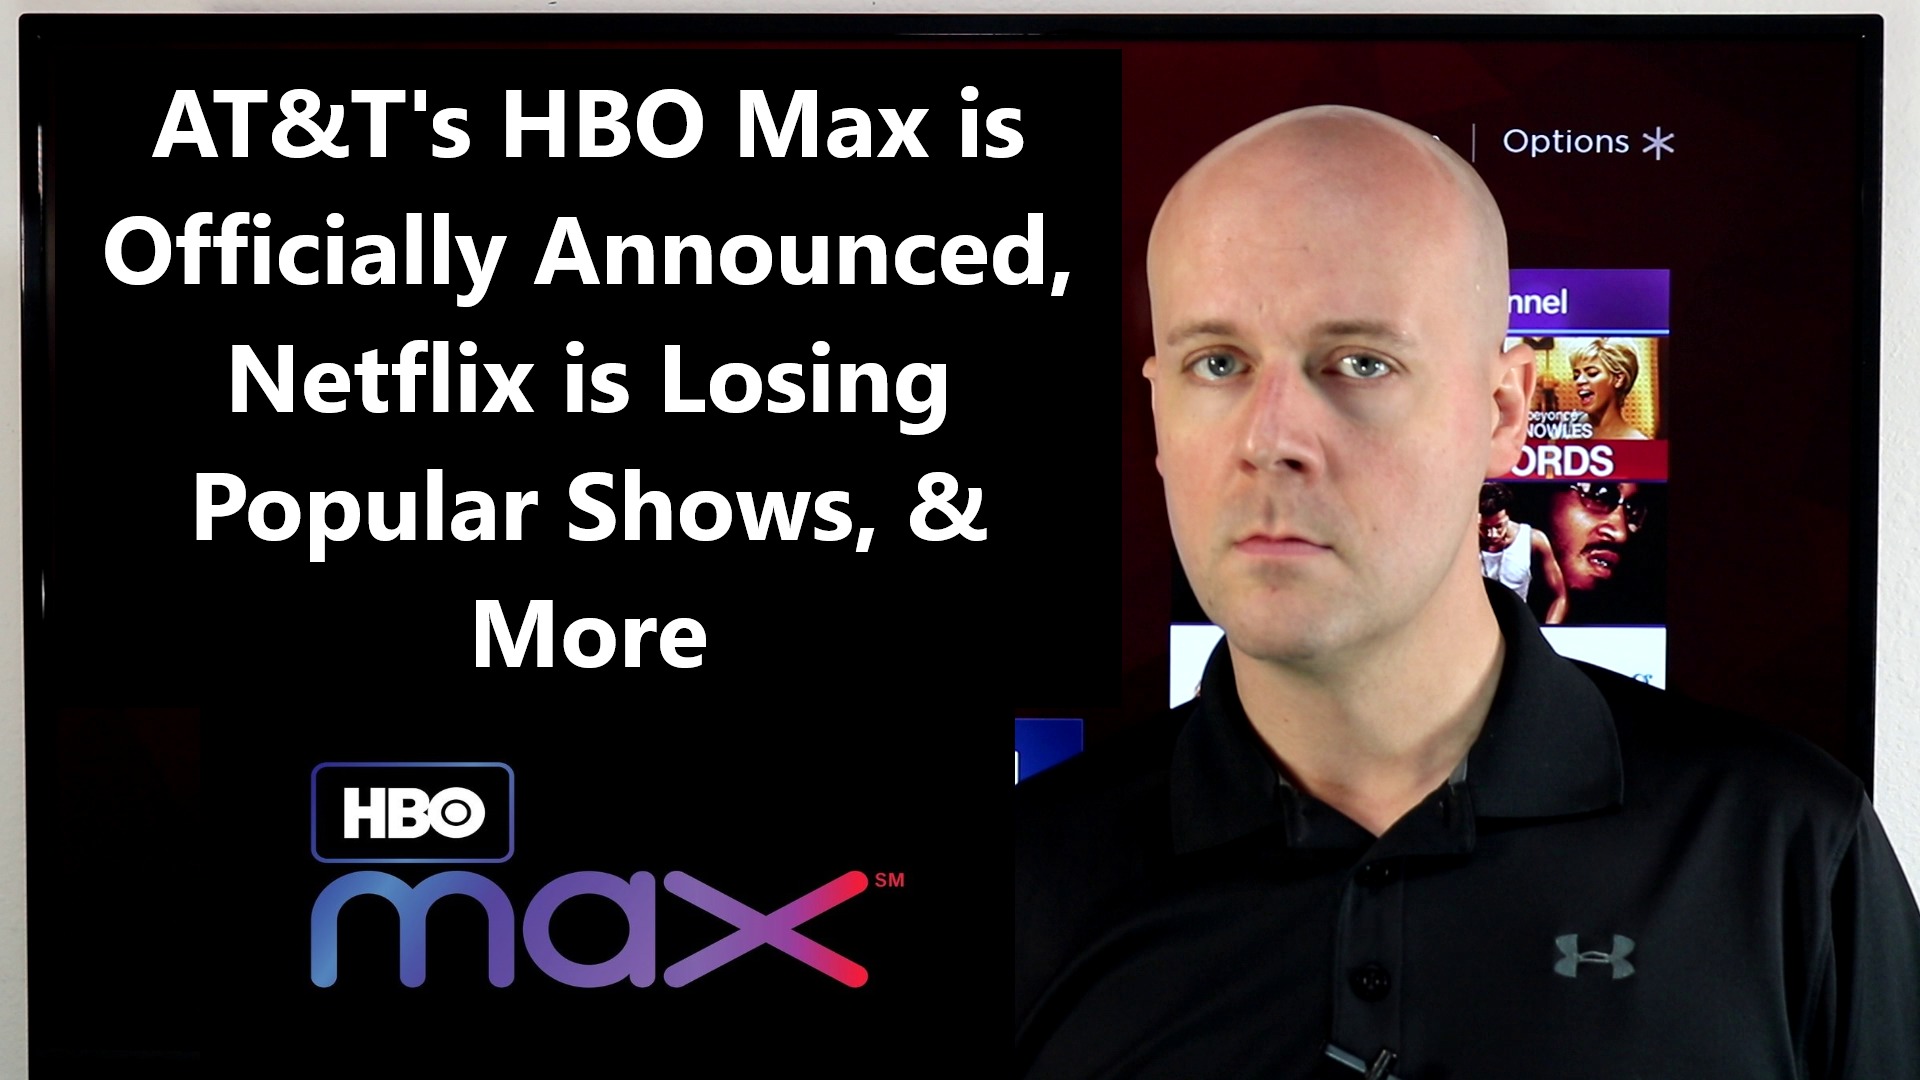 Cord Cutting Today #90 – AT&T’s HBO Max is Officially Announced, Netflix is Losing Popular Shows, Smaller Cord Cutting Services, & More